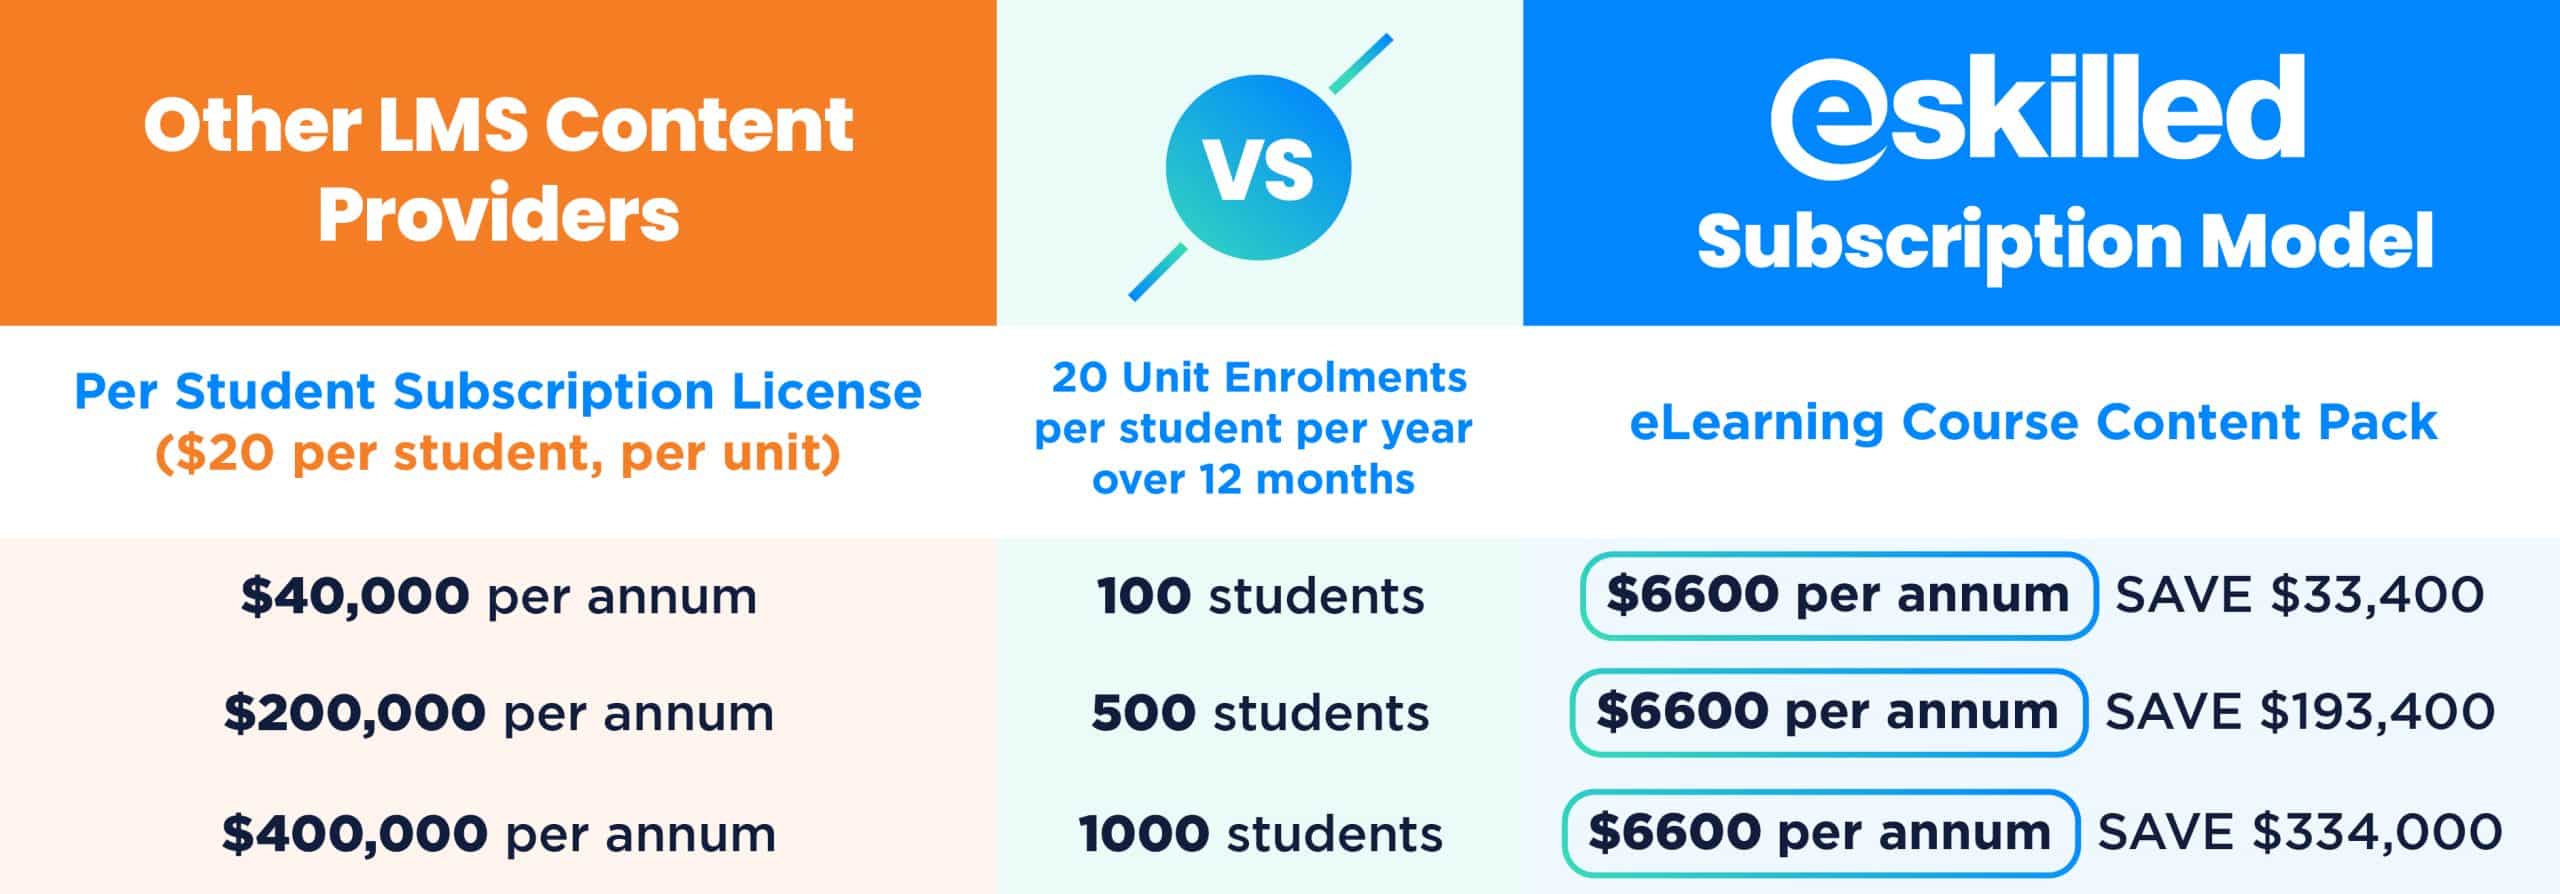 eskilled subscription vs other lms providers